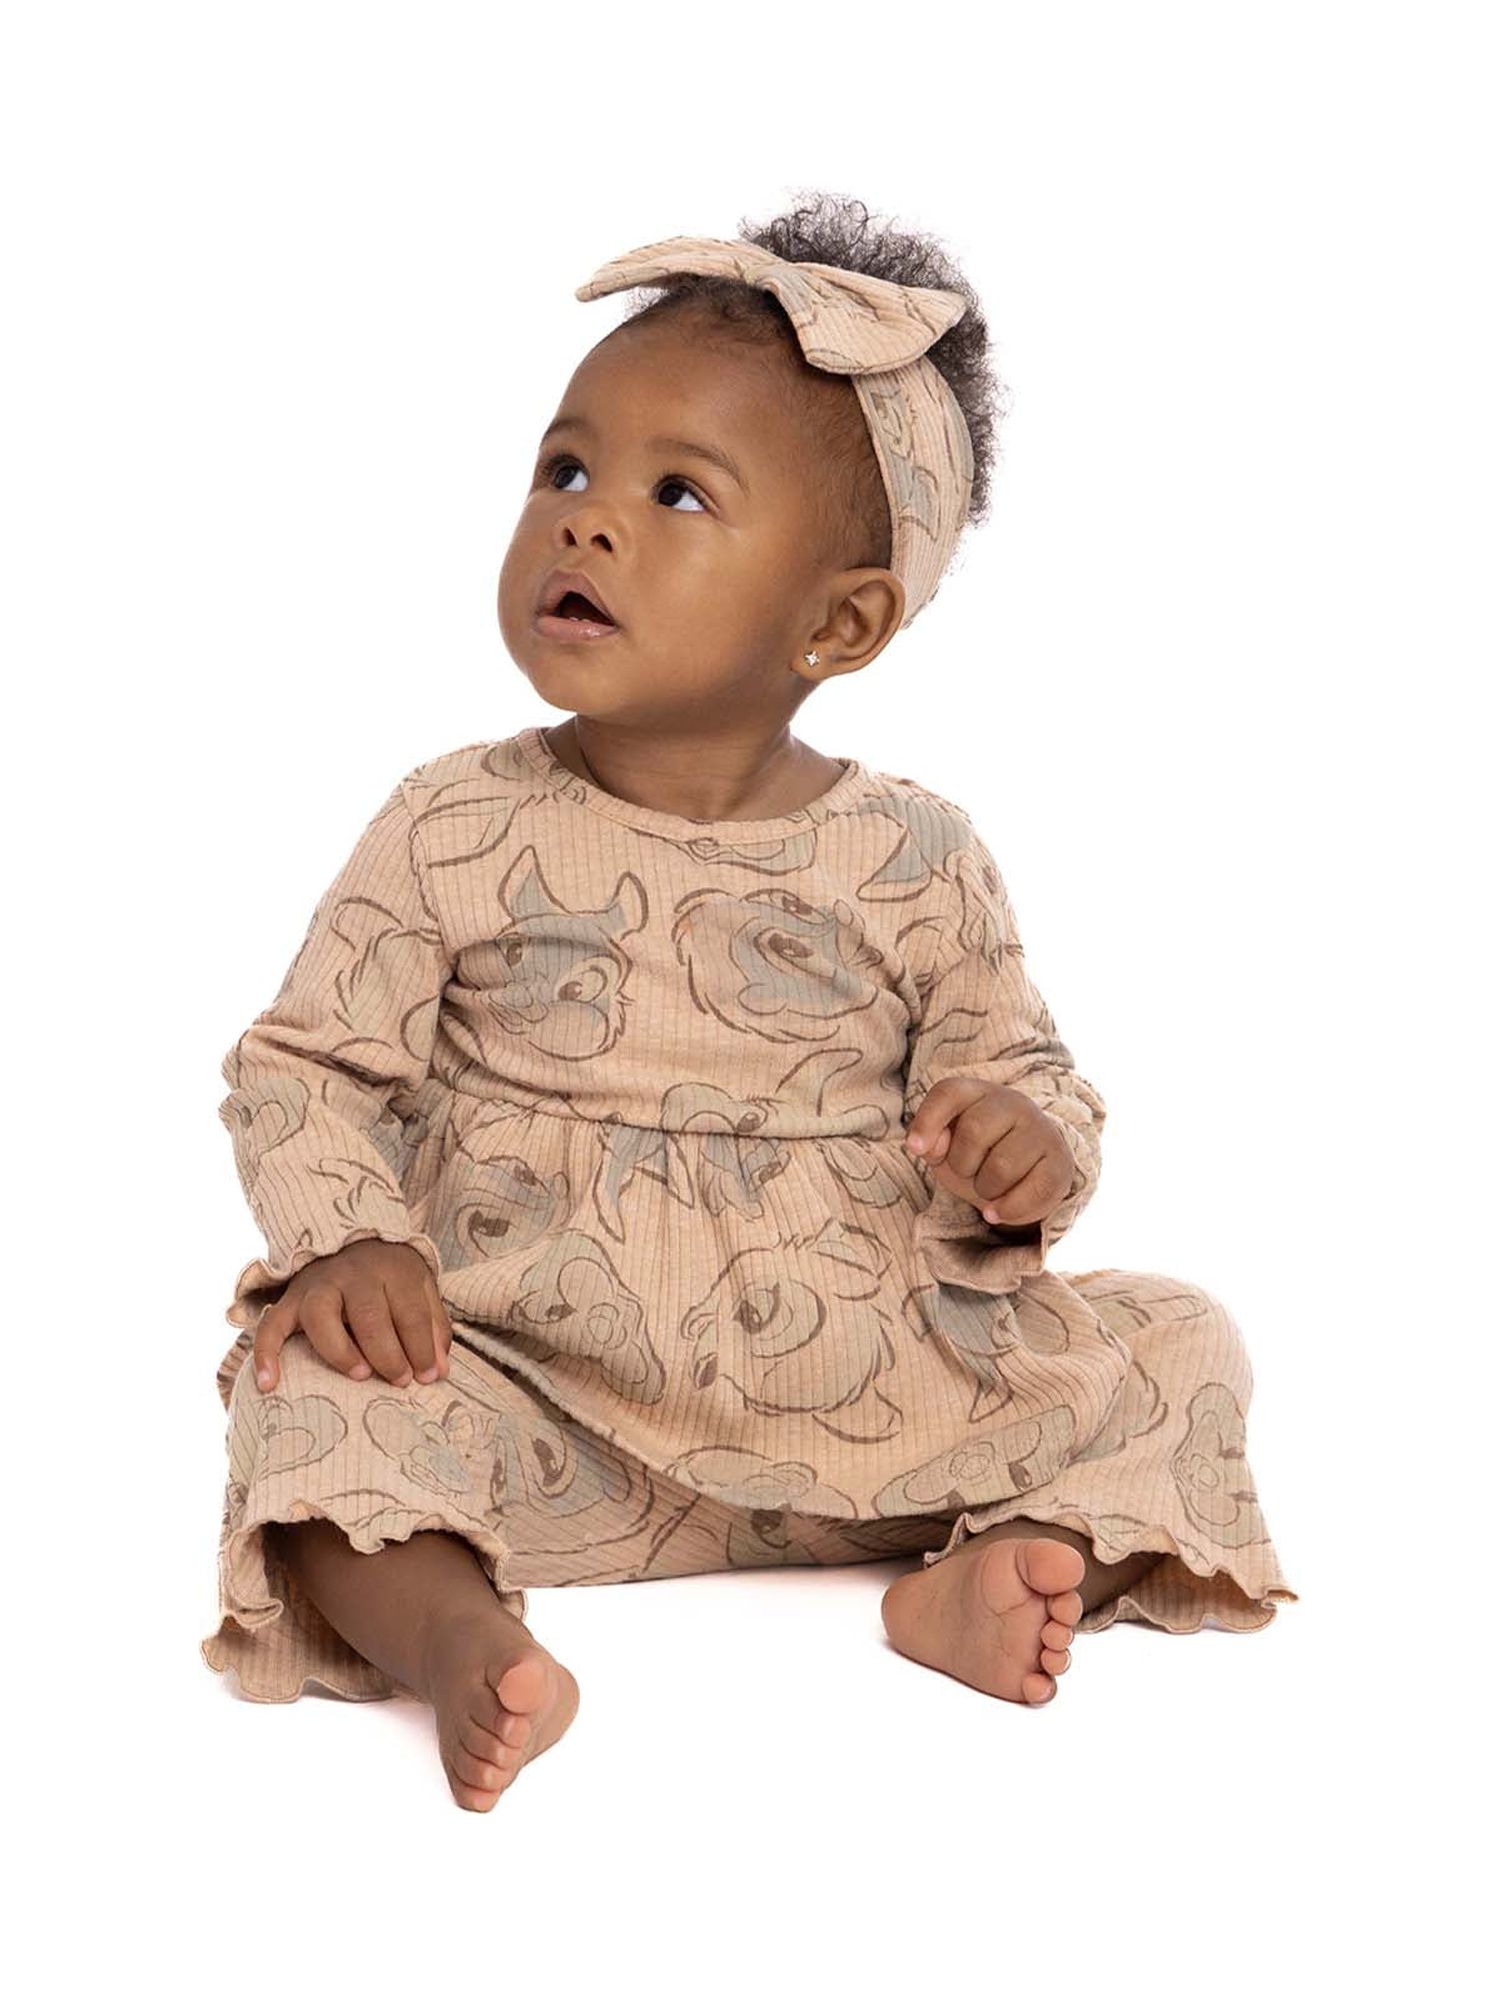 Disney Bambi Baby Girls Top, Pants and Headband, 3-Piece Set, Sizes 0/3-24 Months - image 5 of 7